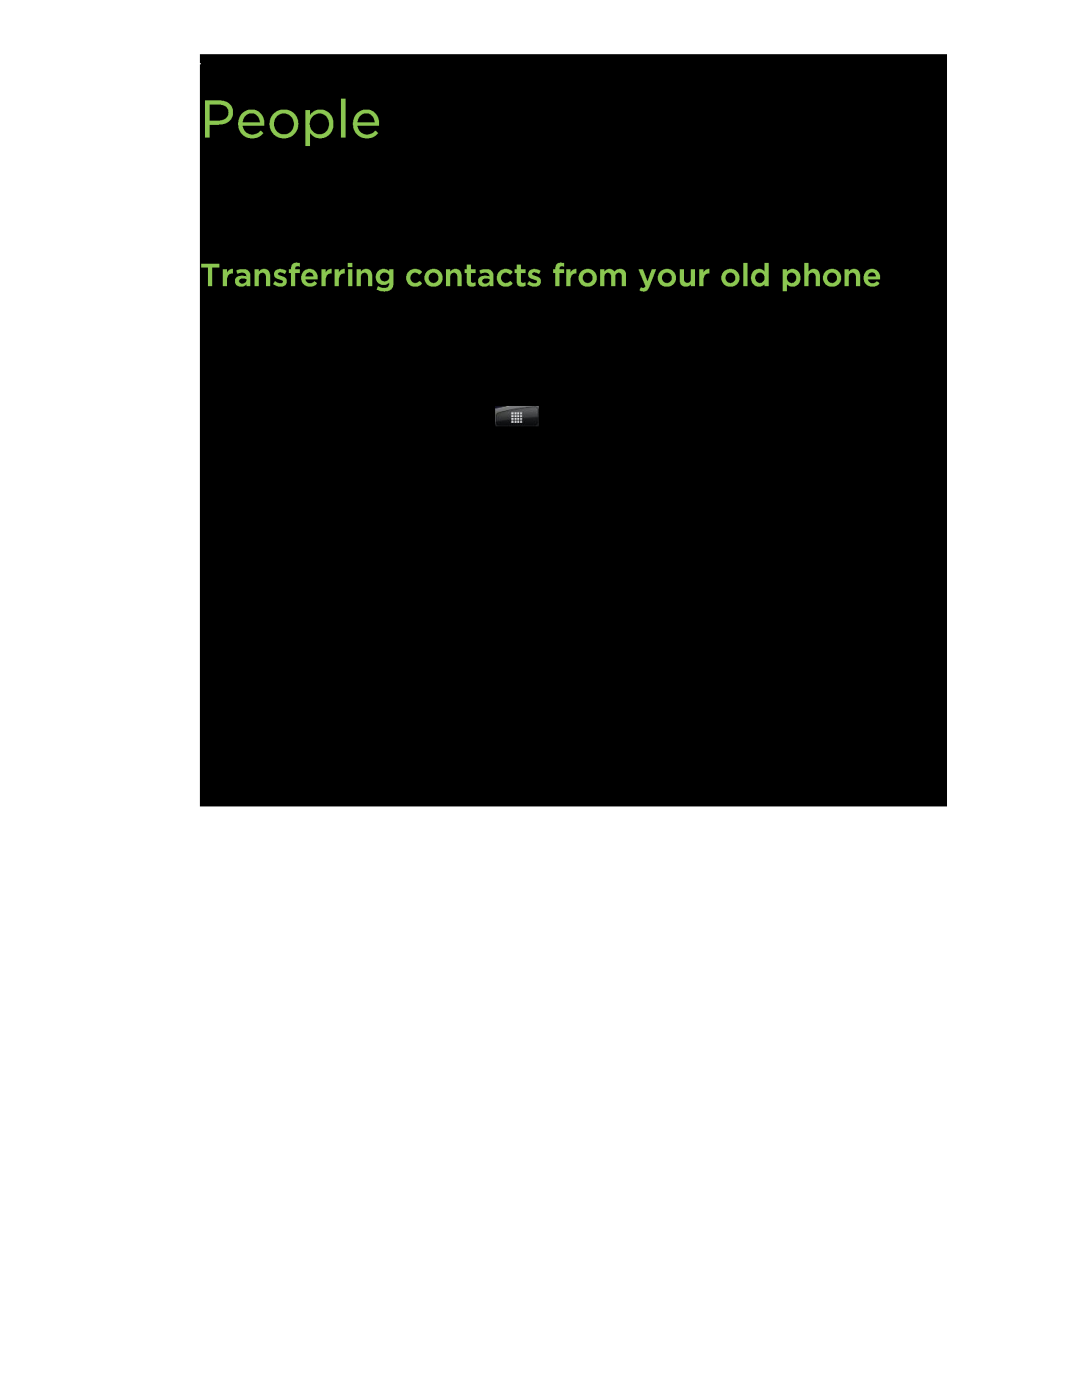 HTC S manual People, Transferring contacts from your old phone 